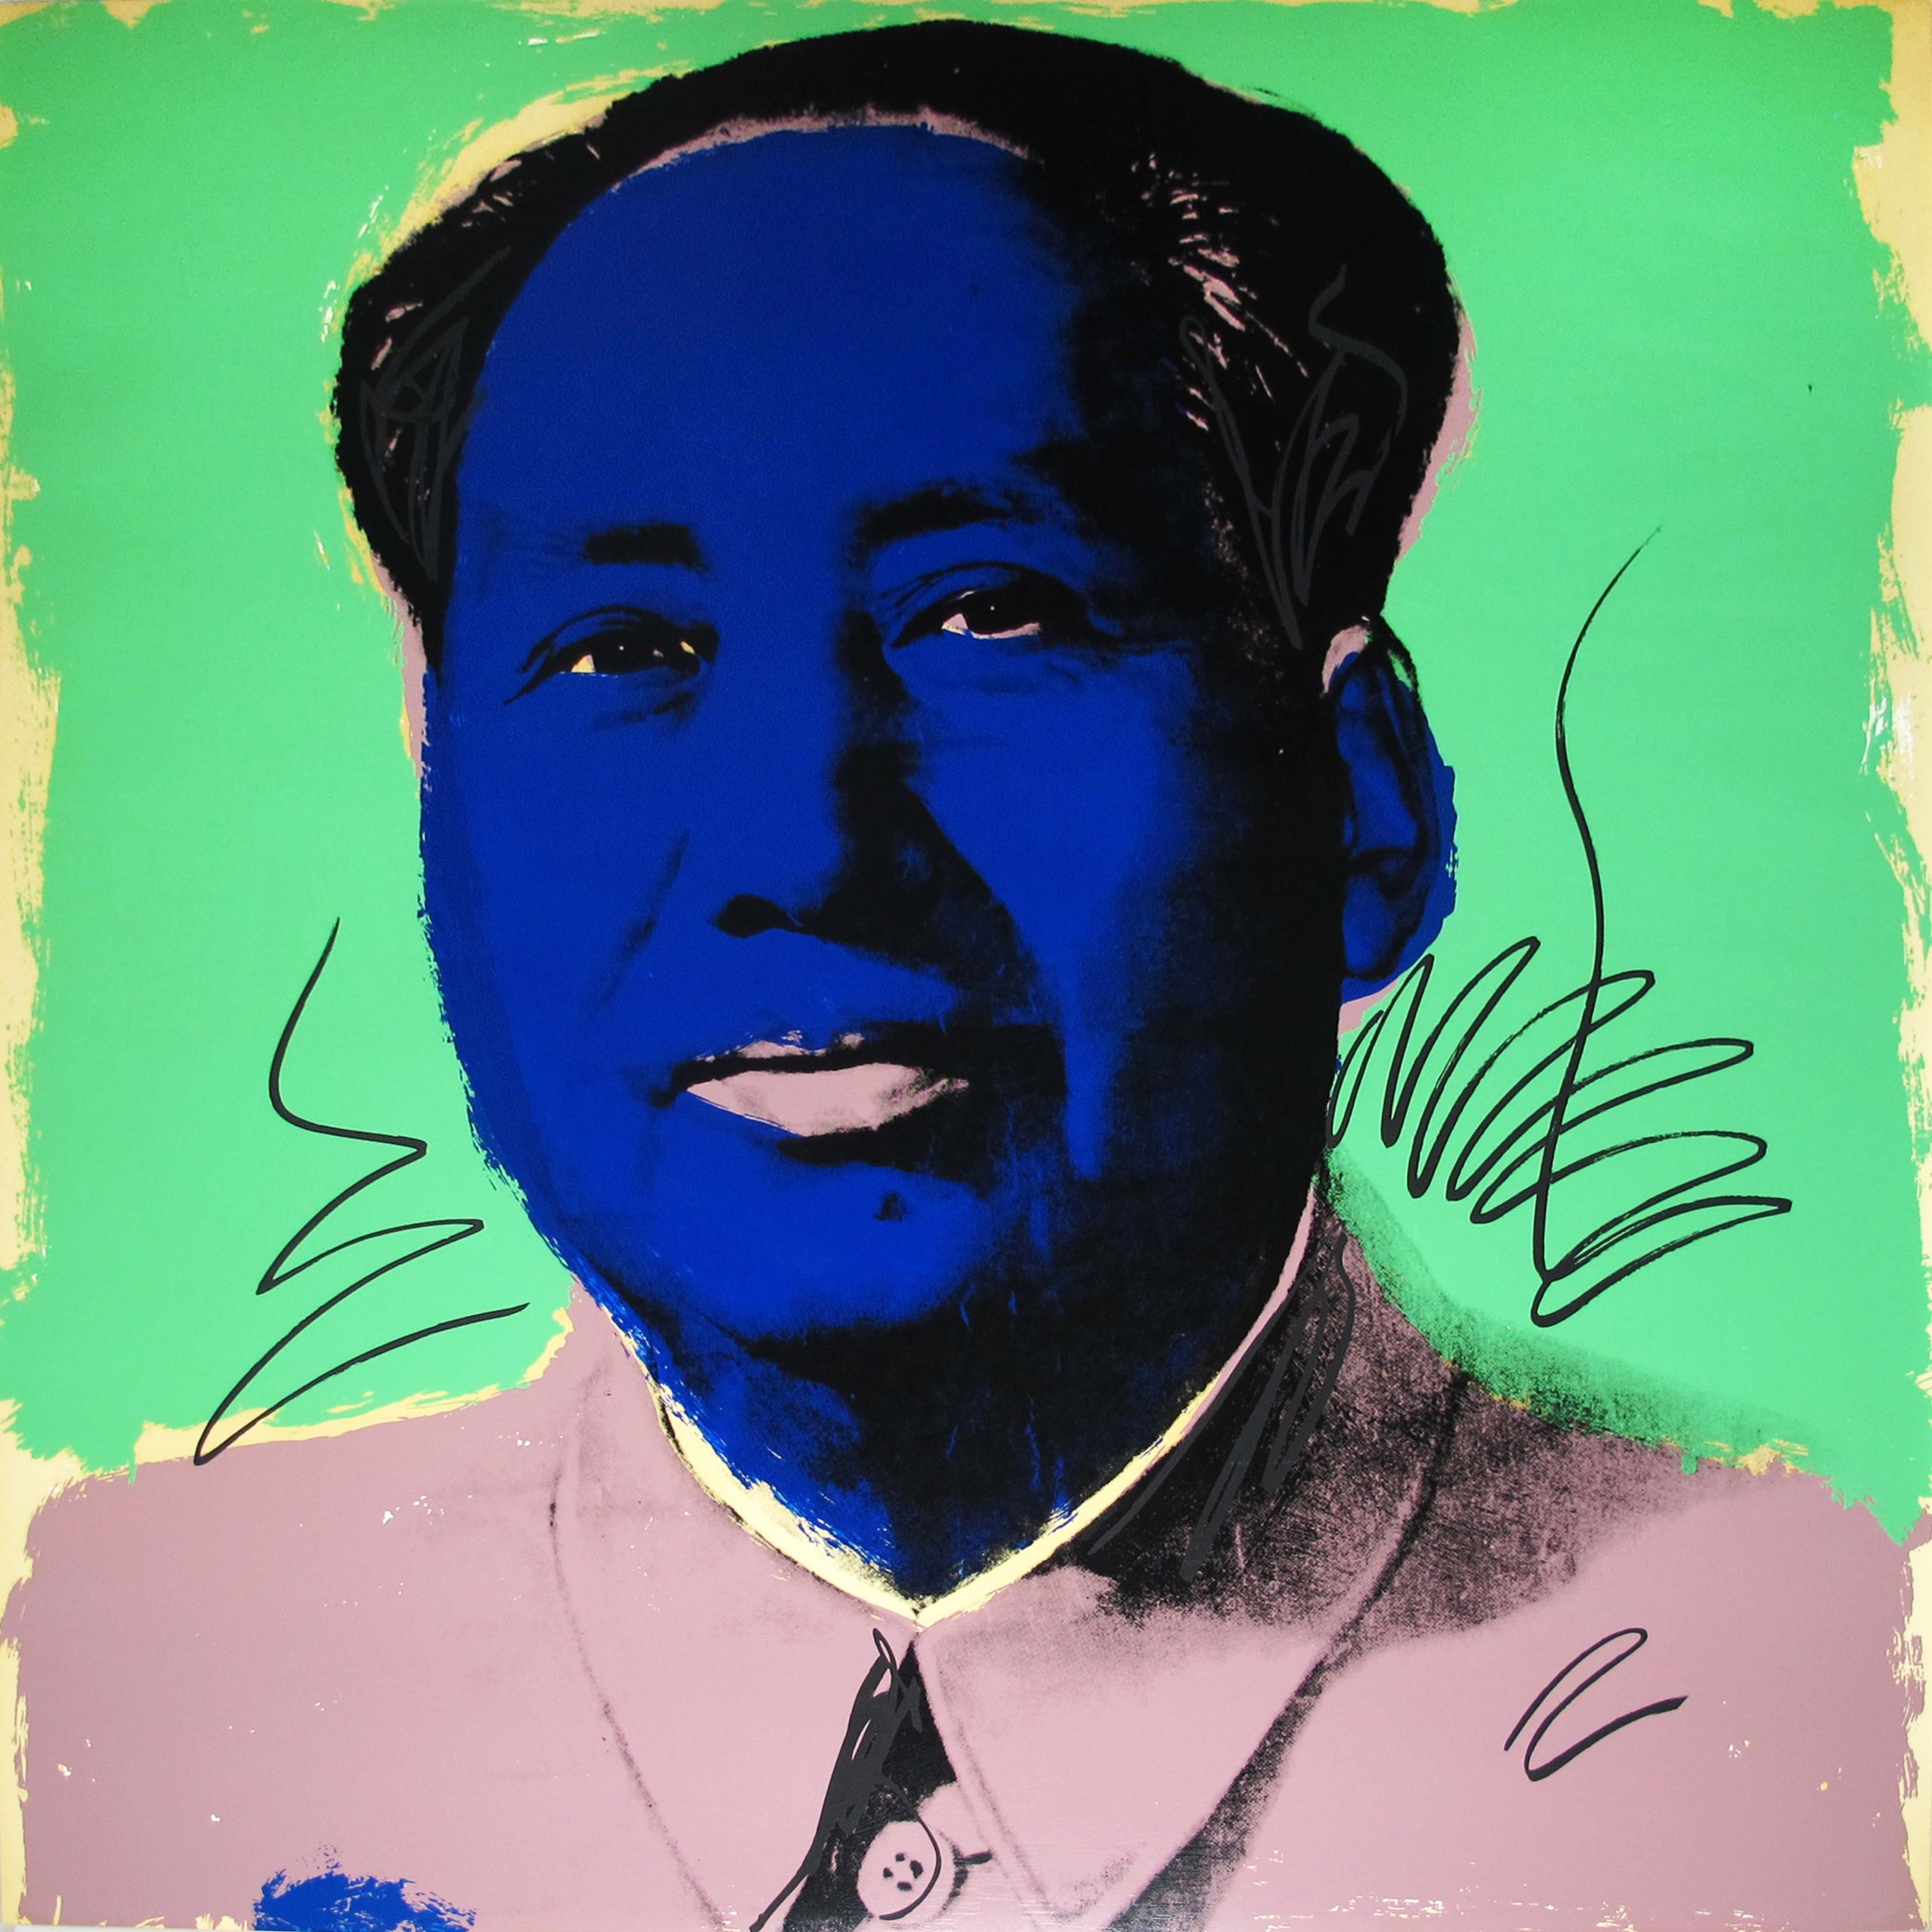 Andy Warhol Mao Giclee Canvas Print Paintings Poster Reproduction 31.5"X31.5" 